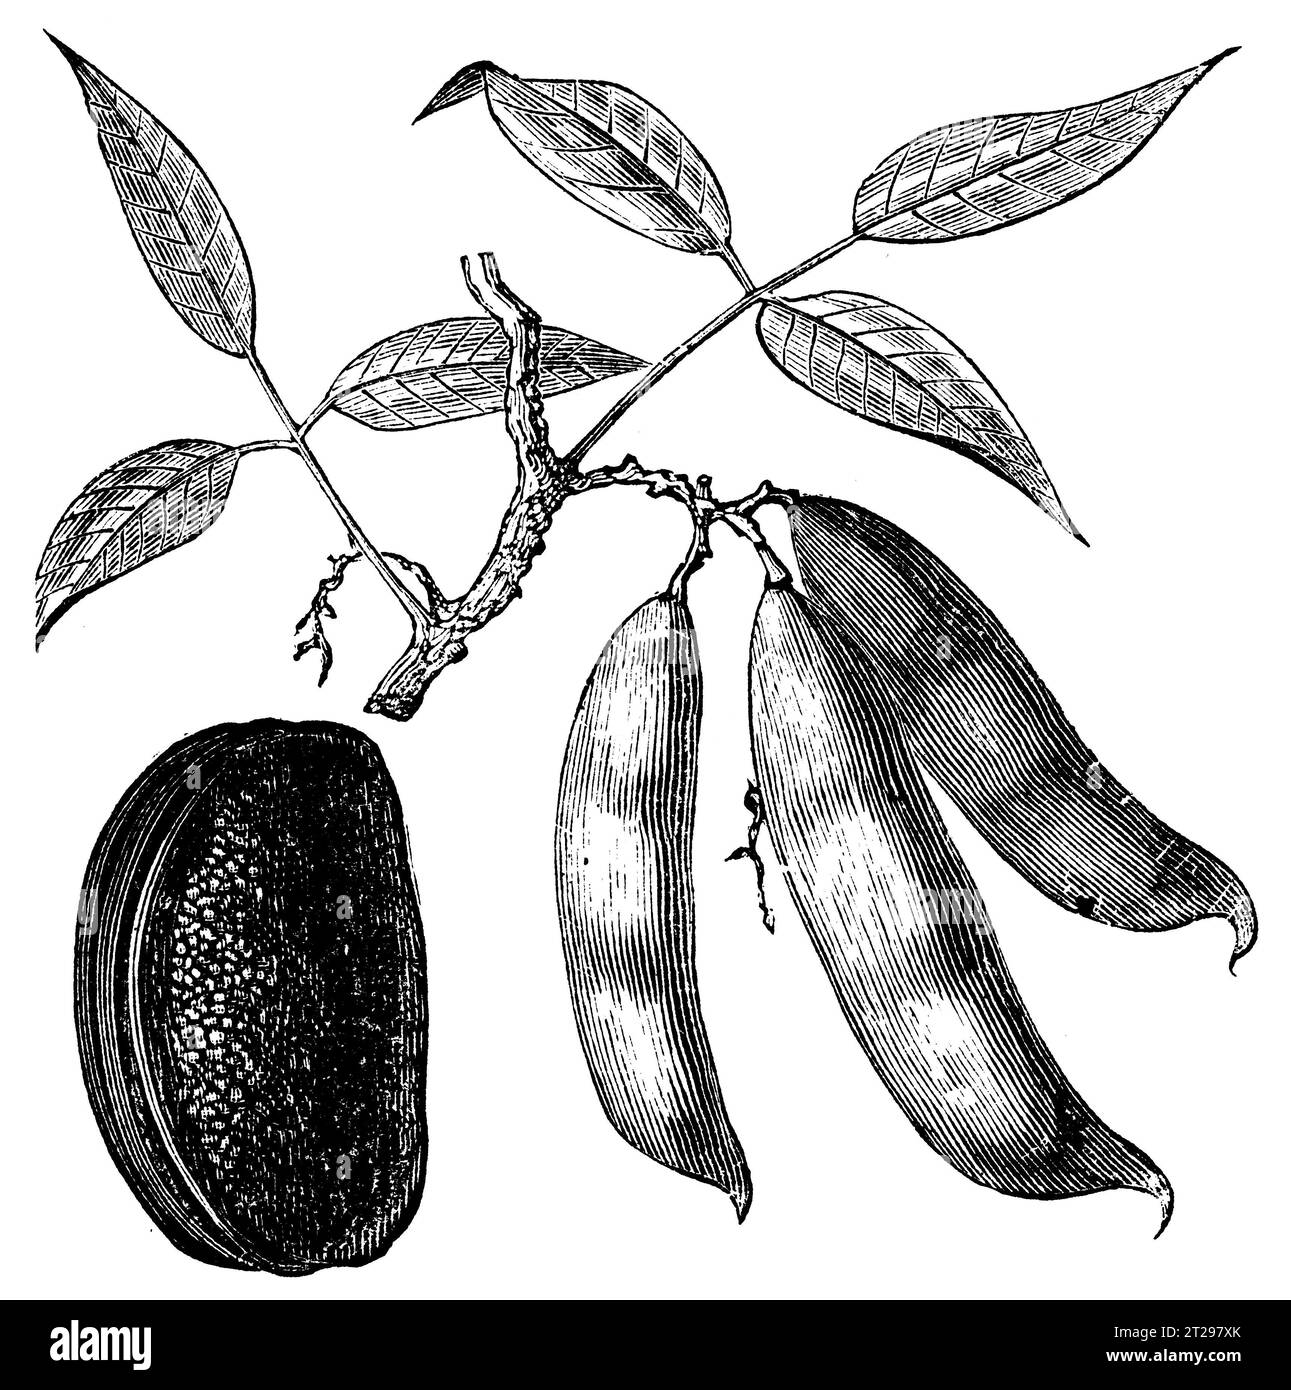 Physostigma venenosum, digitally restored illustration from 'The Condensed American Encyclopedia', published in the 19th century. Stock Photo